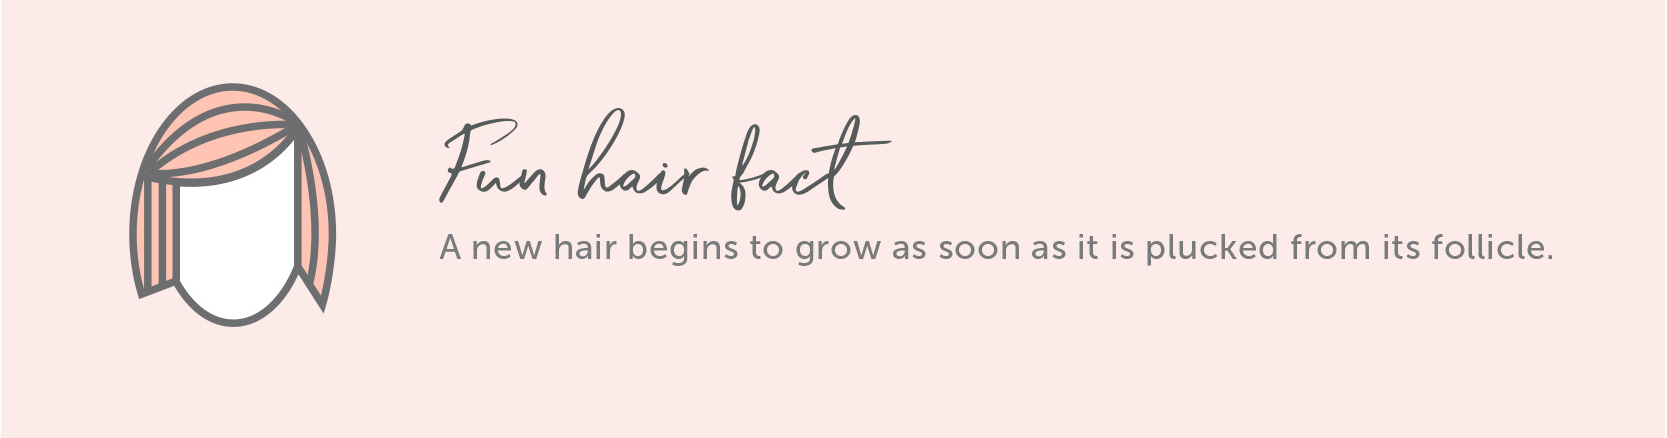 Hair Fact A new hair begins to grow as soon as it is plucked from its follicle.